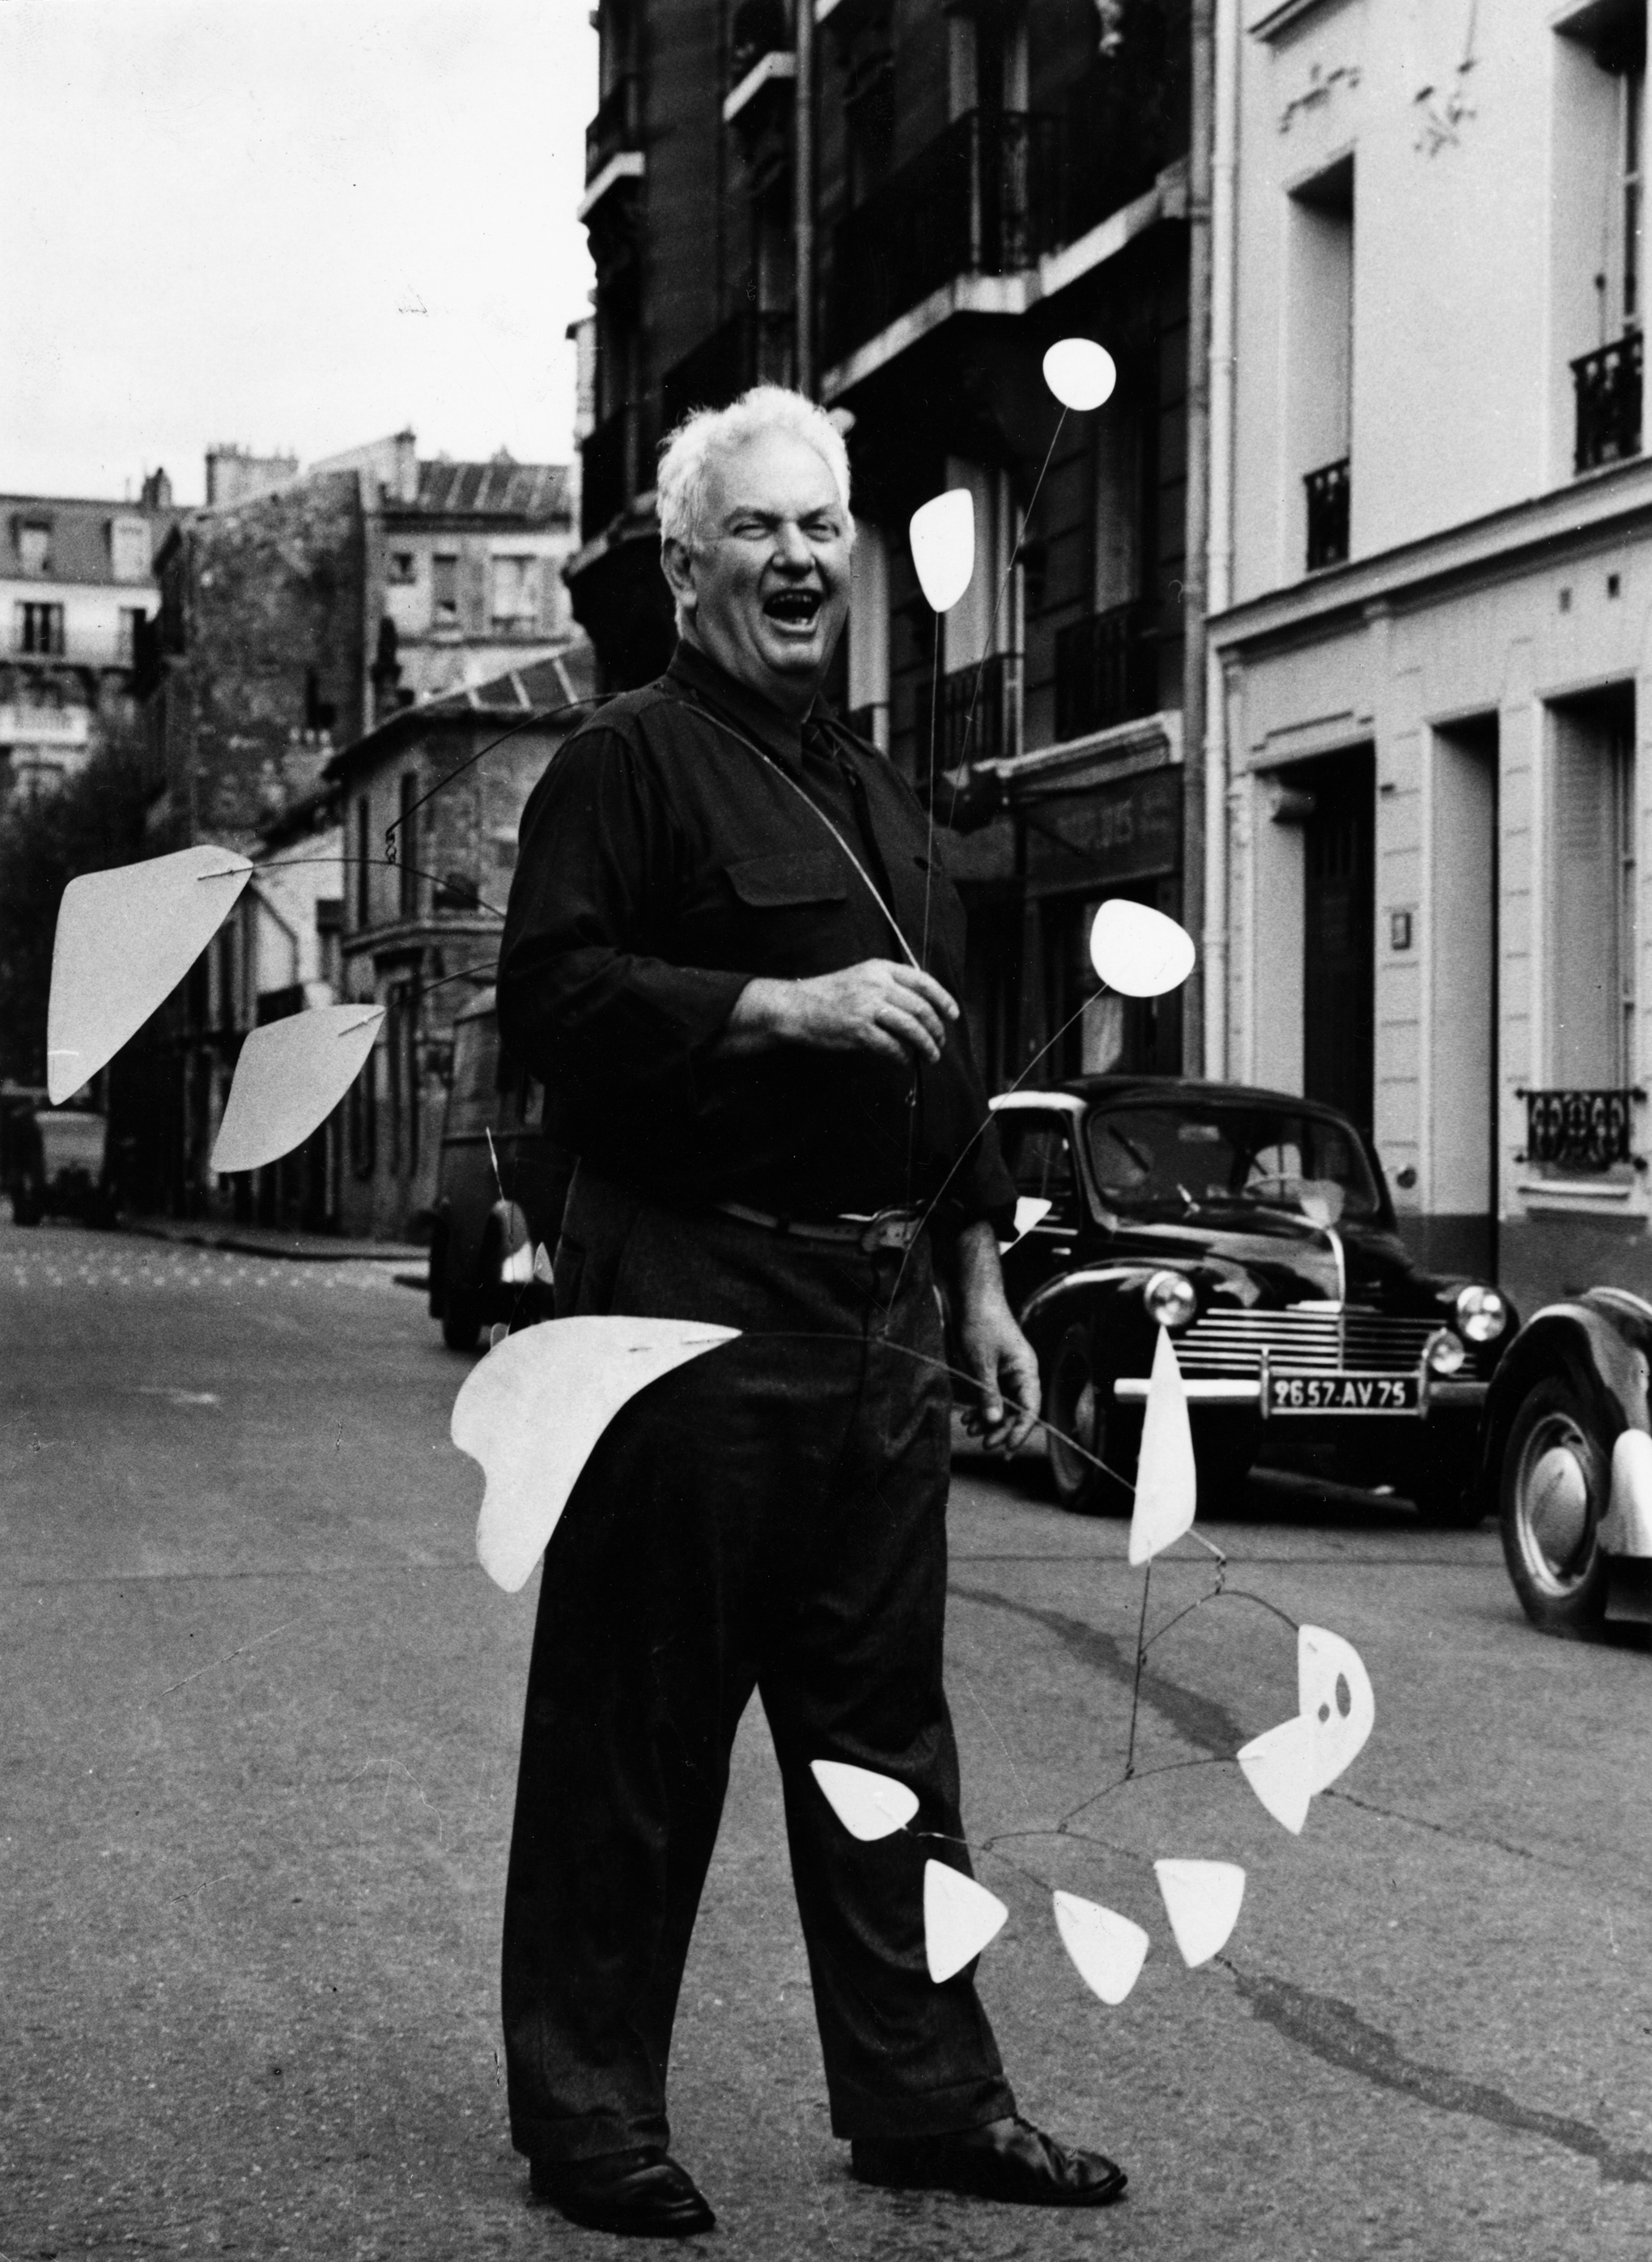 Calder with 21 feuilles blanches